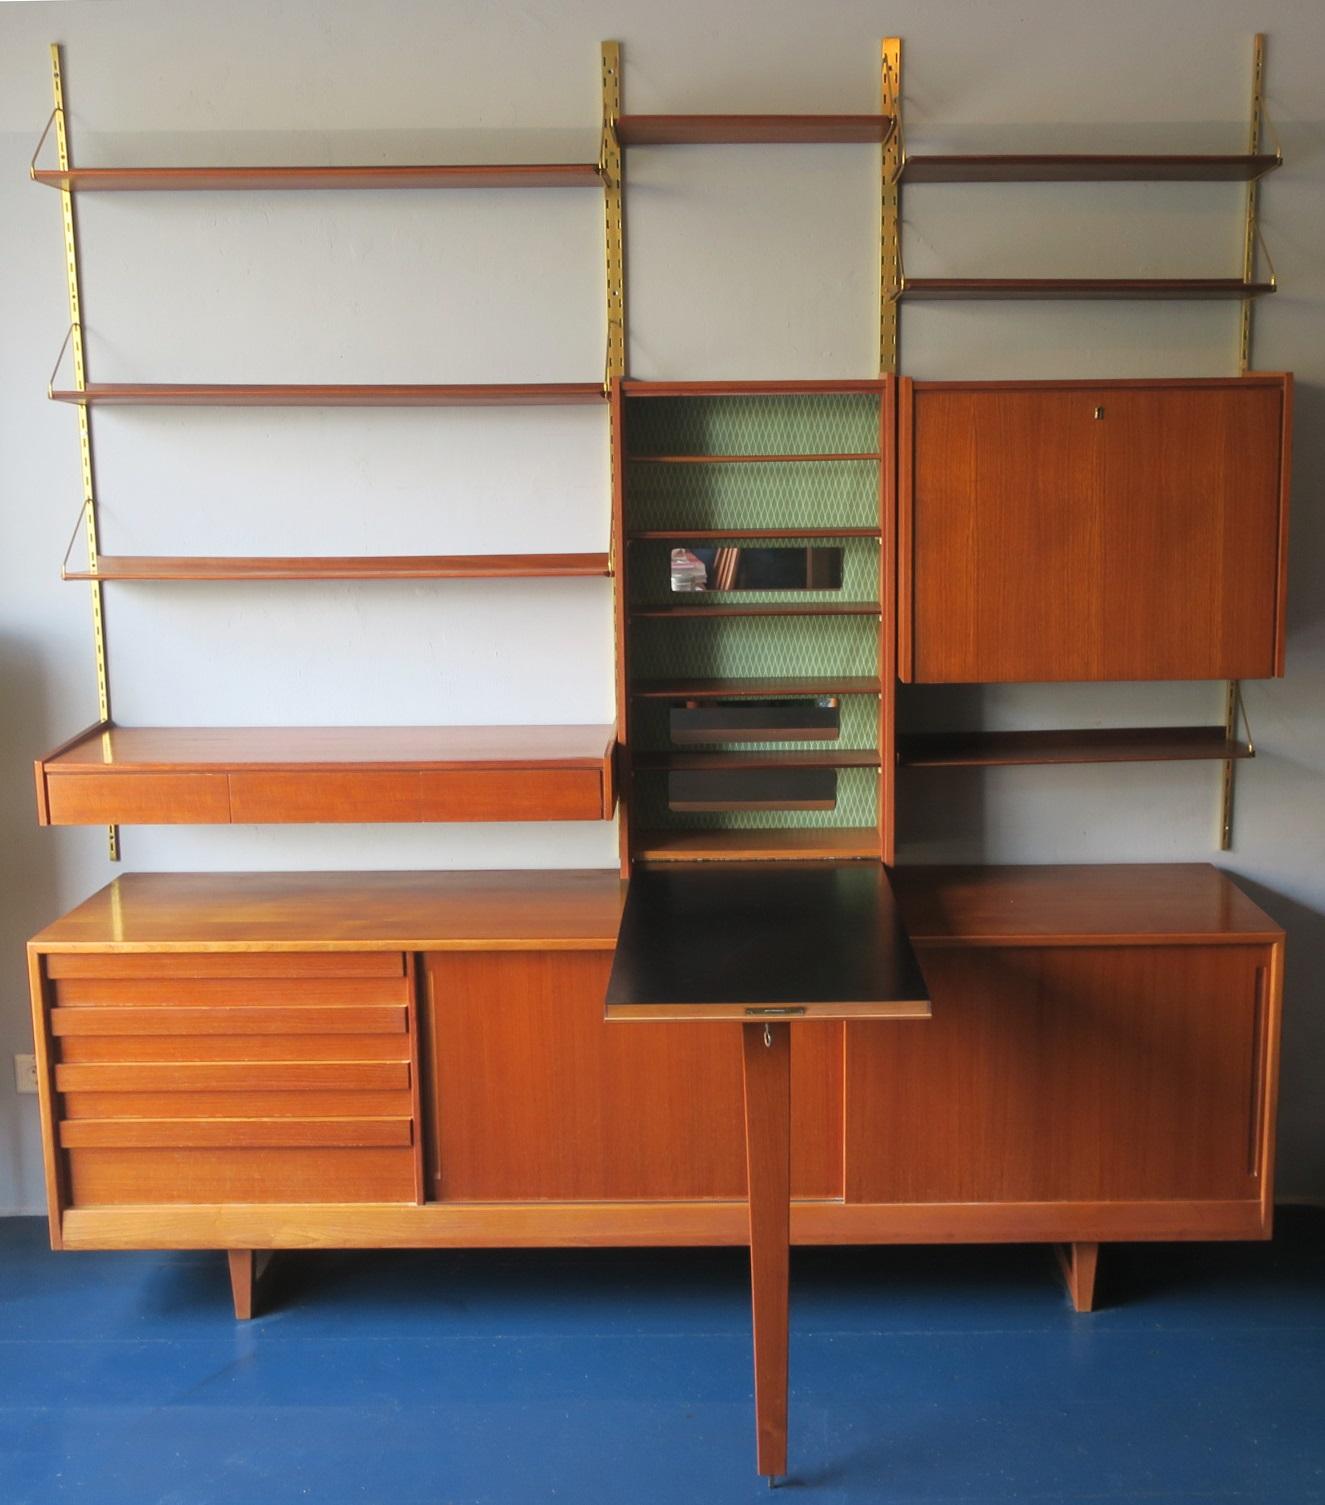 Brass Midcentury Teak Modular Shelf System with Low Sideboard, 1960s For Sale